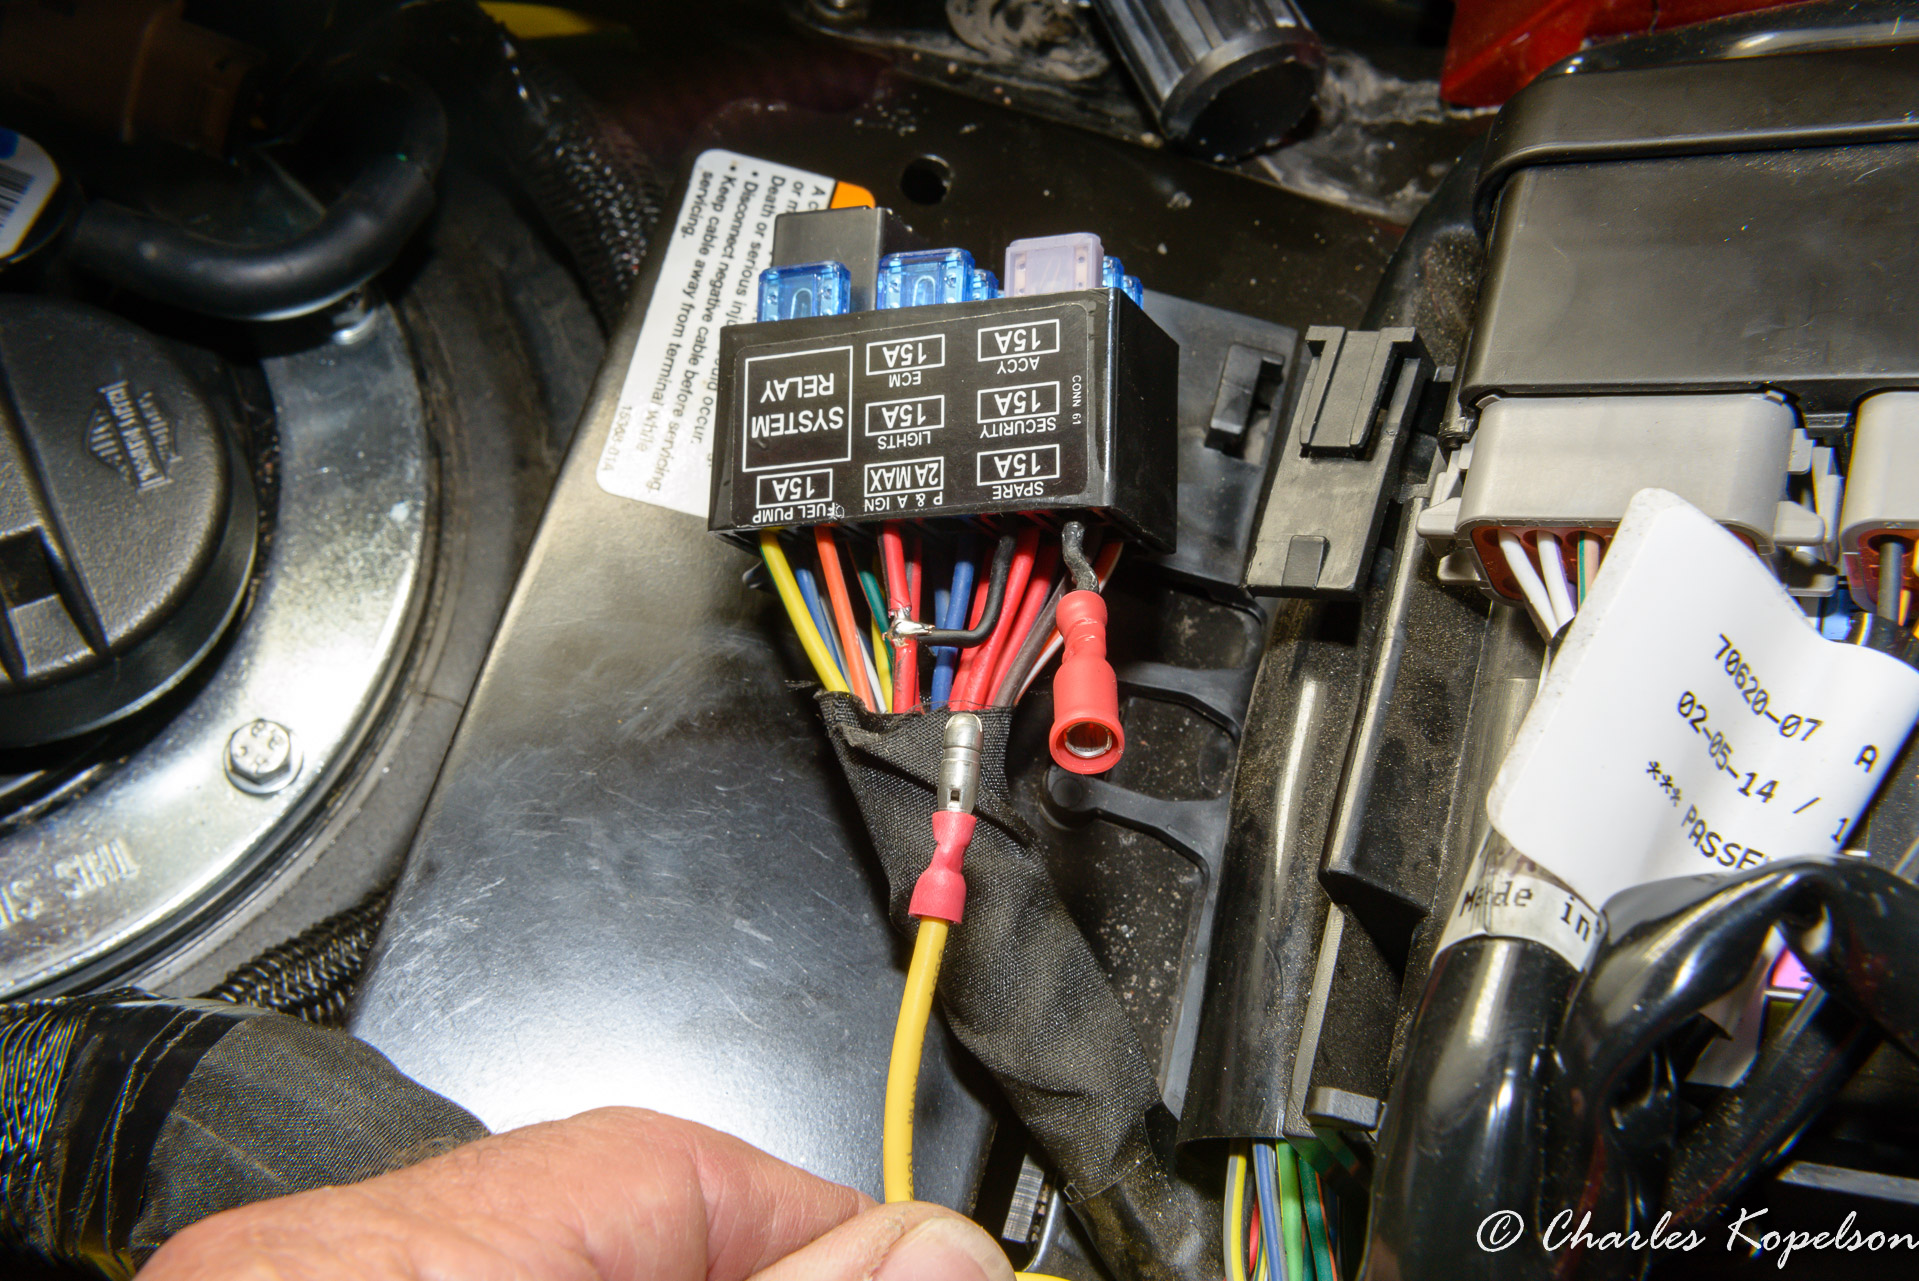 I tied one of the black wires around the red/ bk wire and soldered it.  This gave me a fuse block with an ignition source I could use without having to buy new terminal pins. I crimped a bullet connector to the second black  wire coming out of the fuse block and the yellow wire going to my aux light relay.